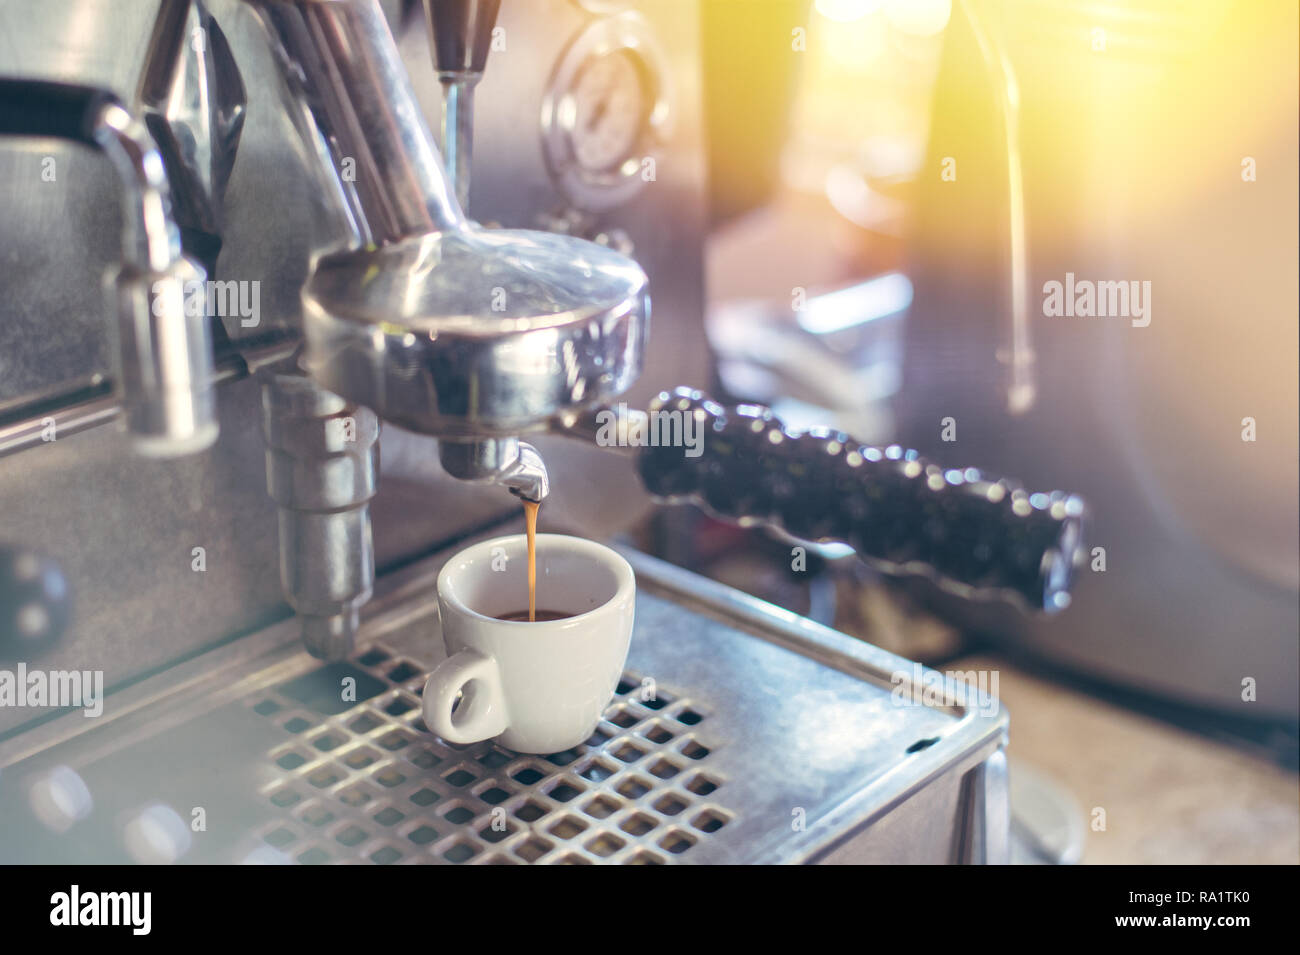 Proffessional brewing - coffee bar details. Espresso coffee pouring from espresso machine. Stock Photo